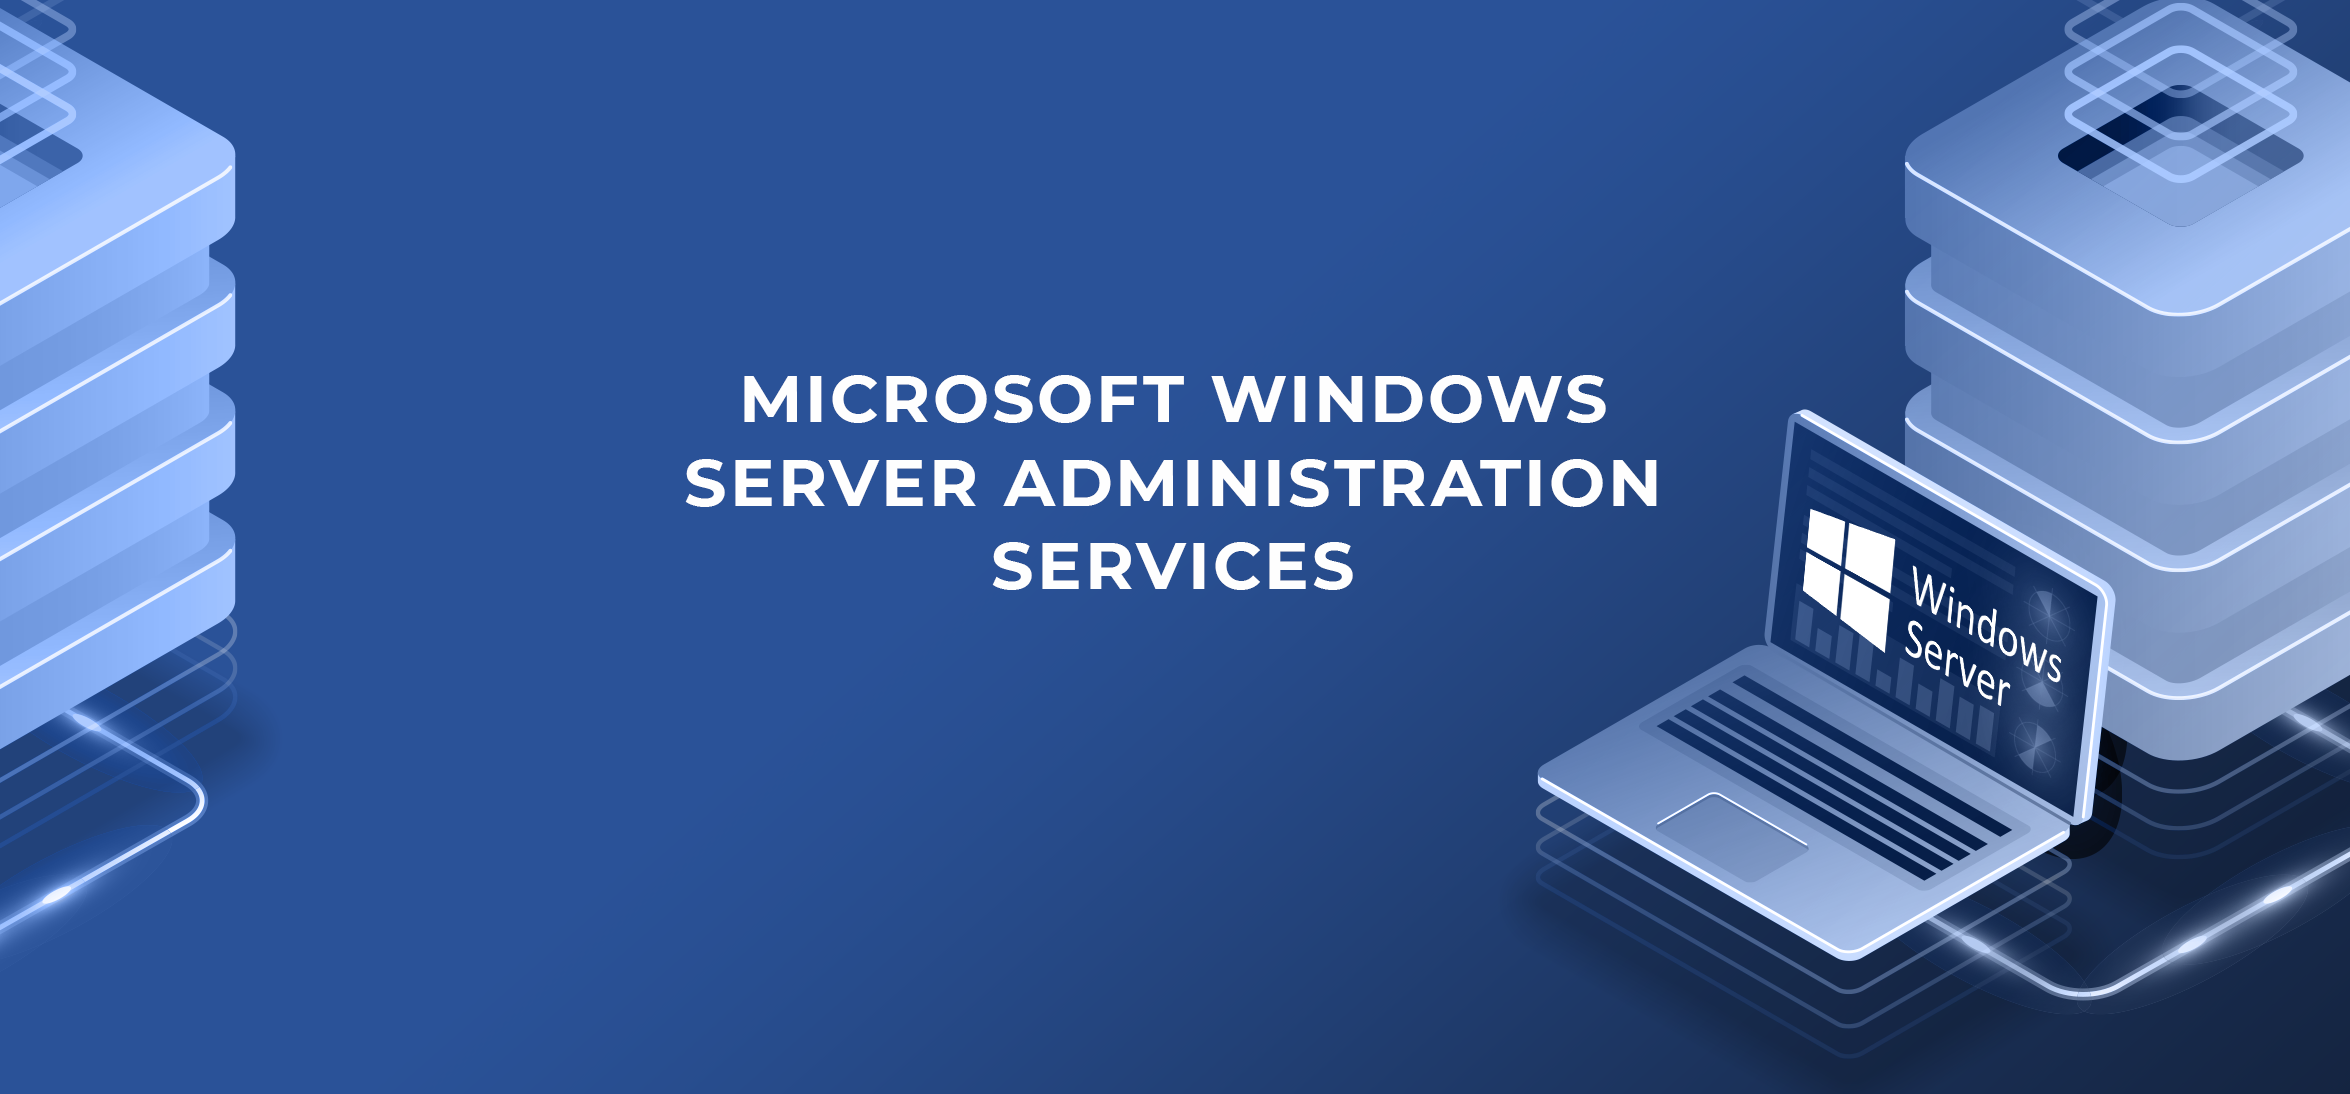 Effective Windows Server Administration and Support Solution Provider in Julian CA, 92036